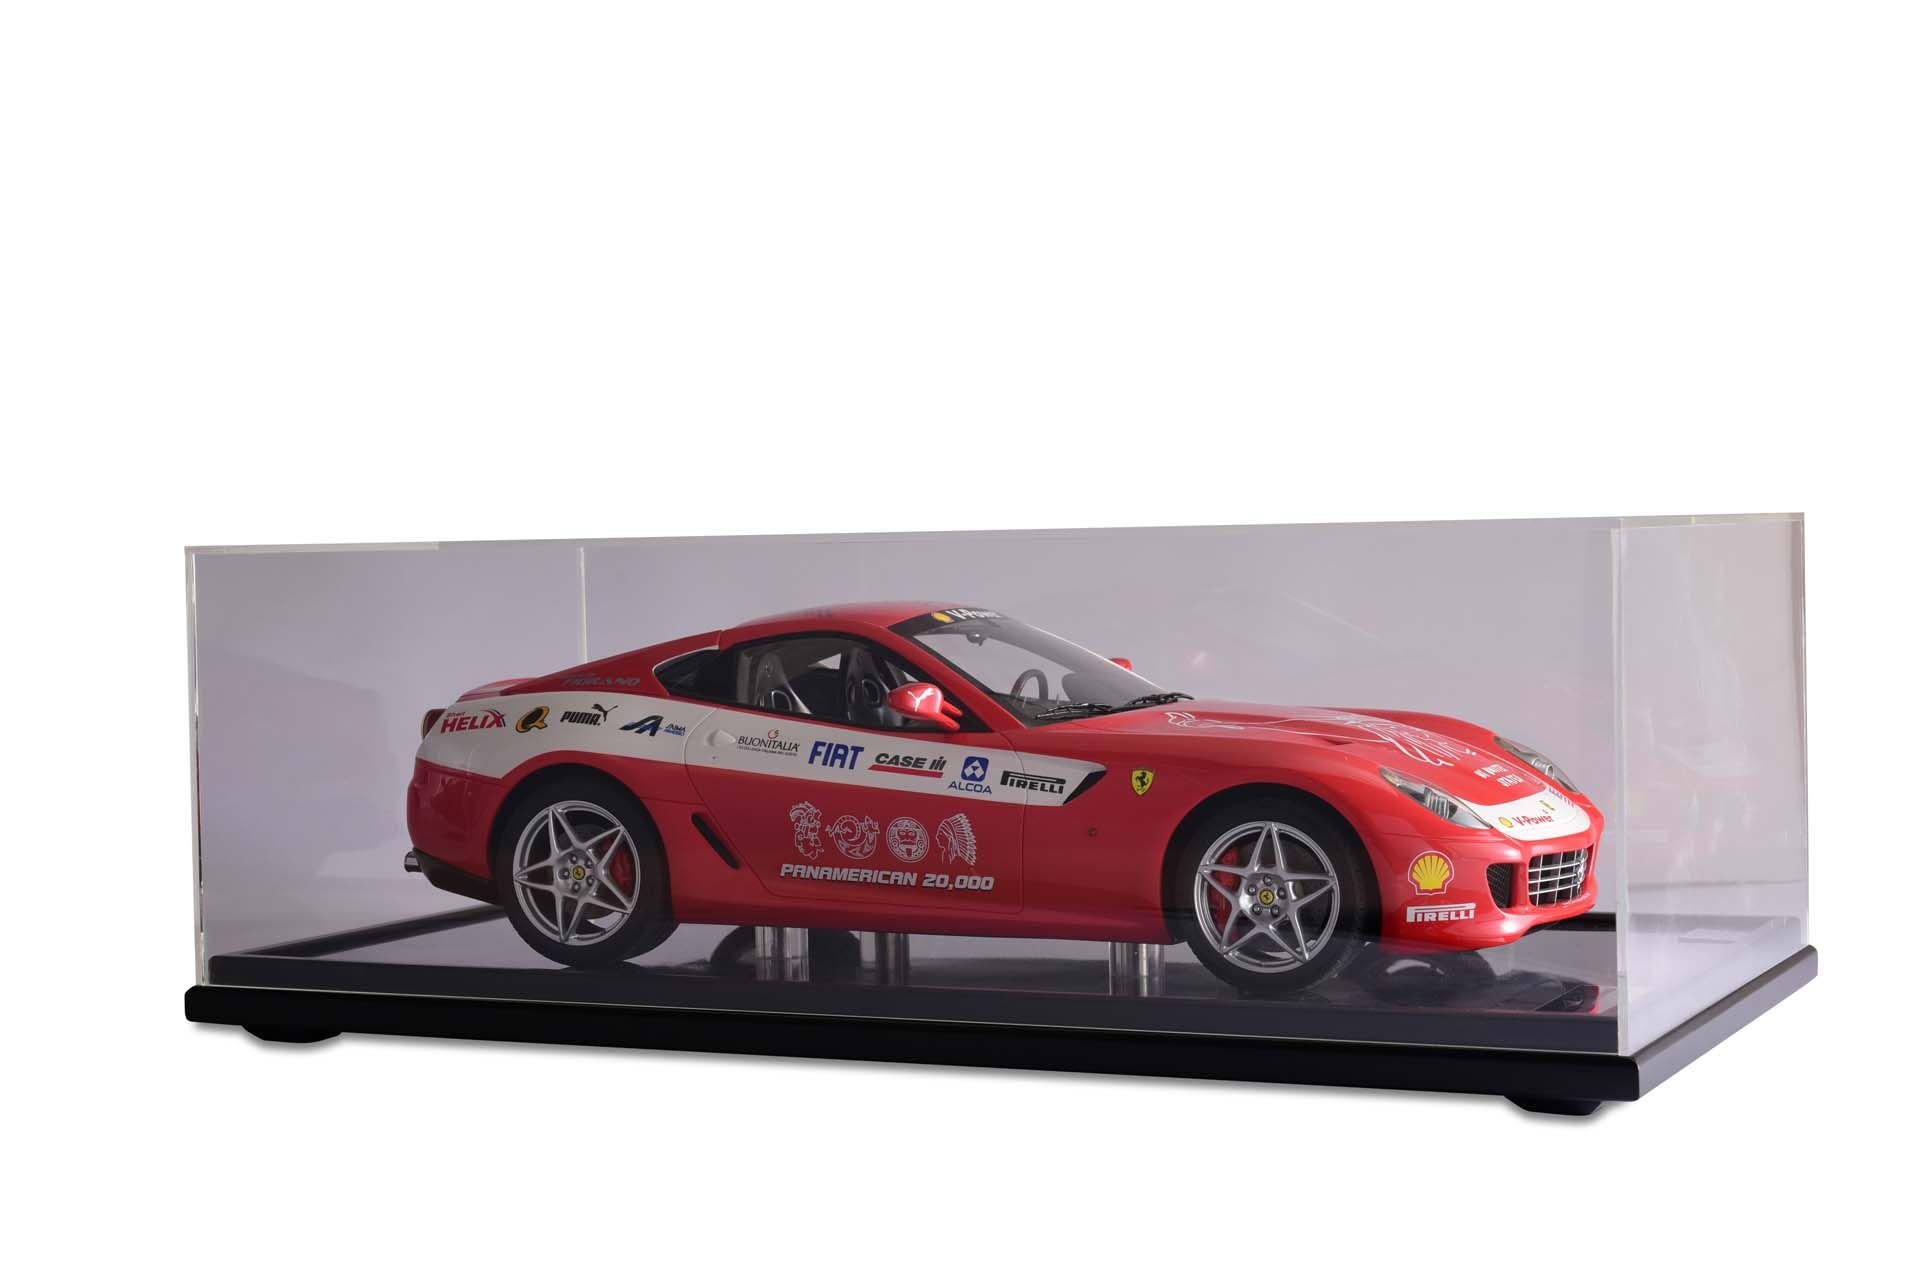 For Sale Special Edition Amalgam model of the sister car to Jim Taylor's Ferrari 599 Panamerican 20,000